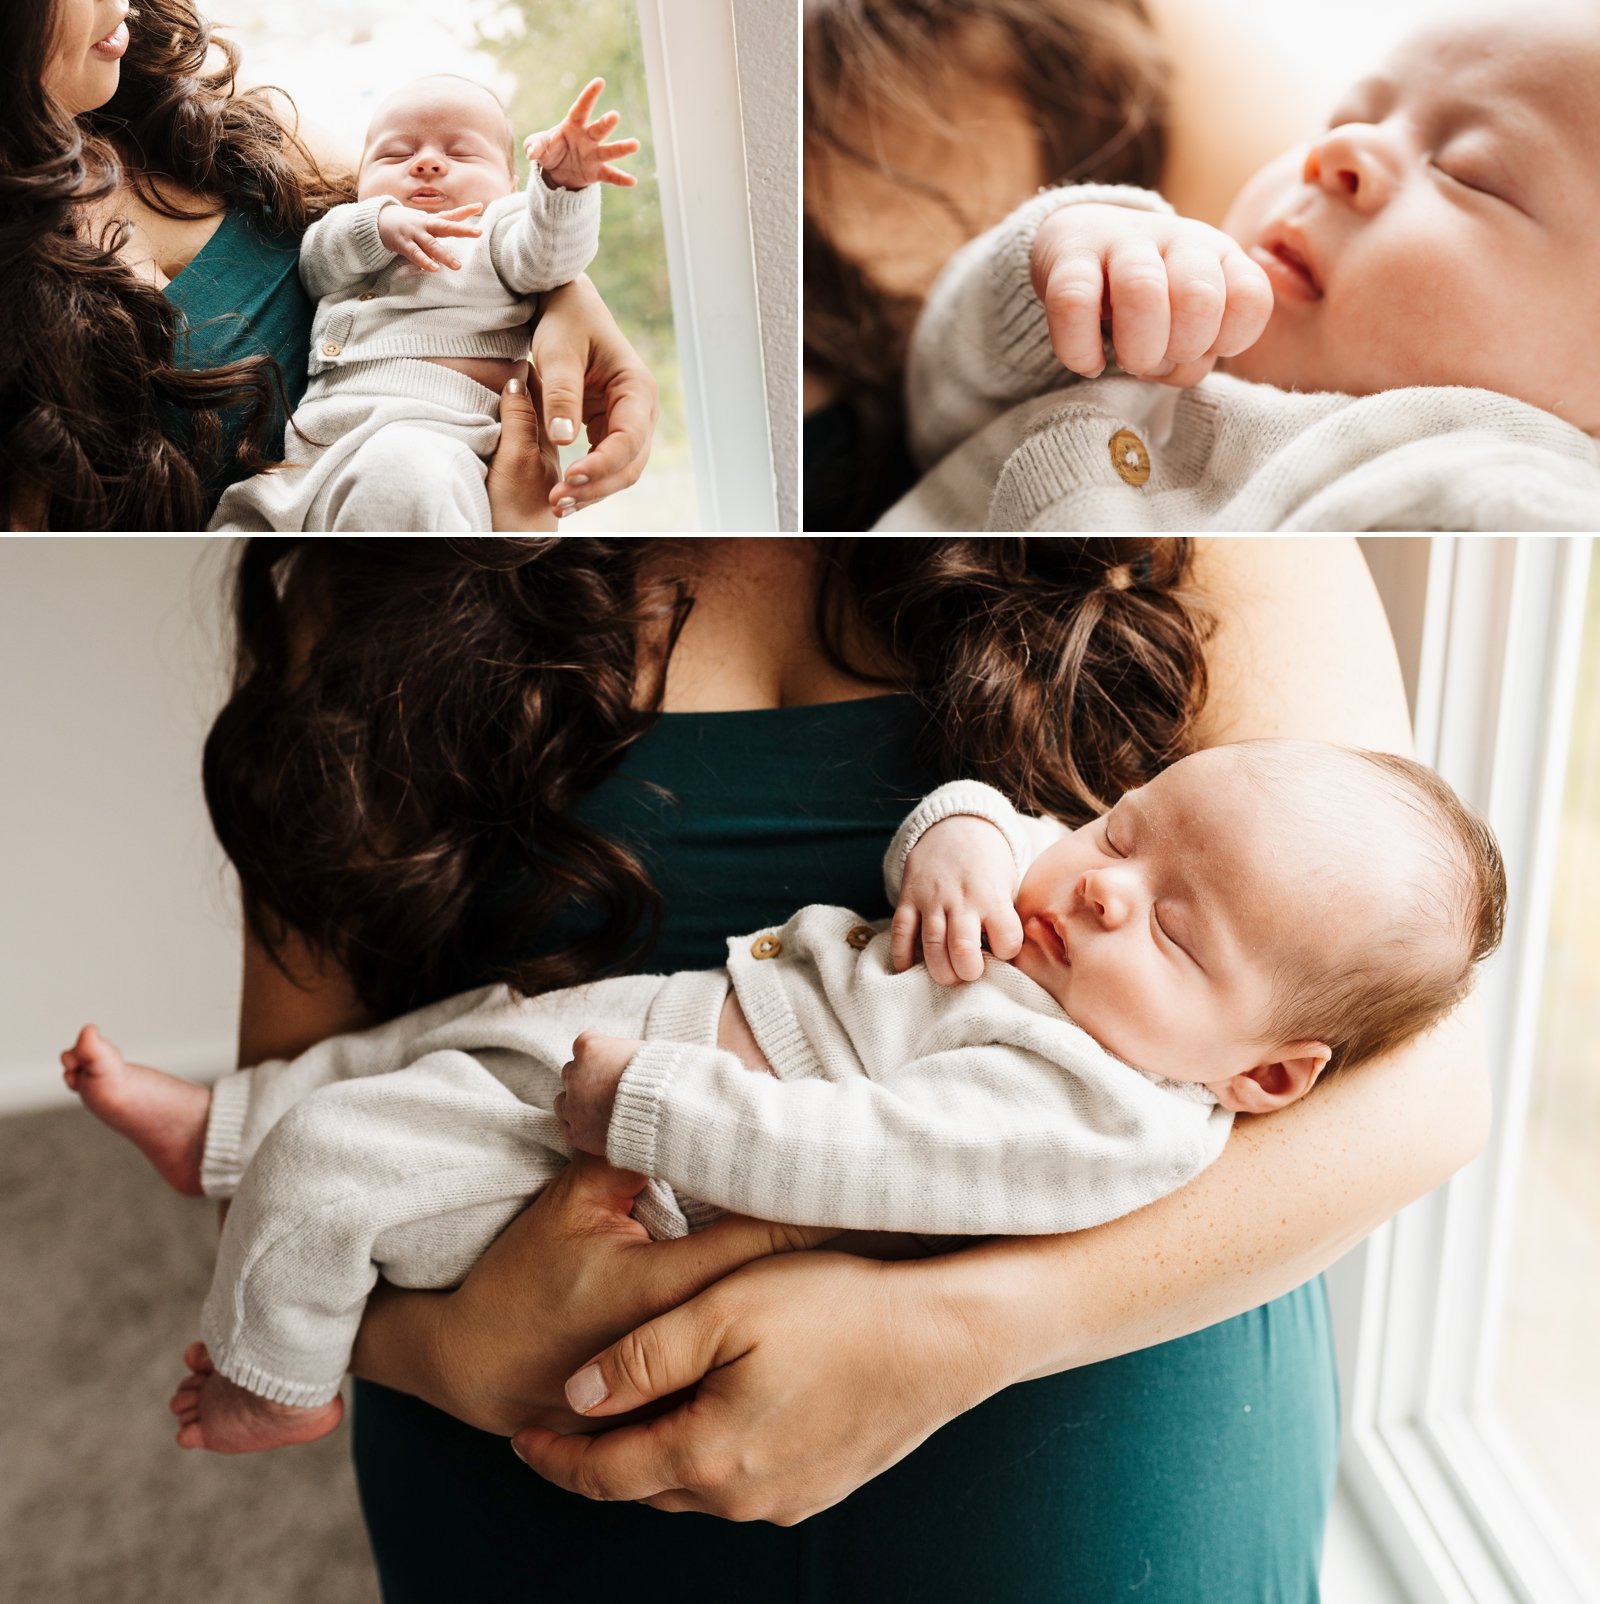 daly city at home newborn lifestyle photoshoot with sibling  8.jpg